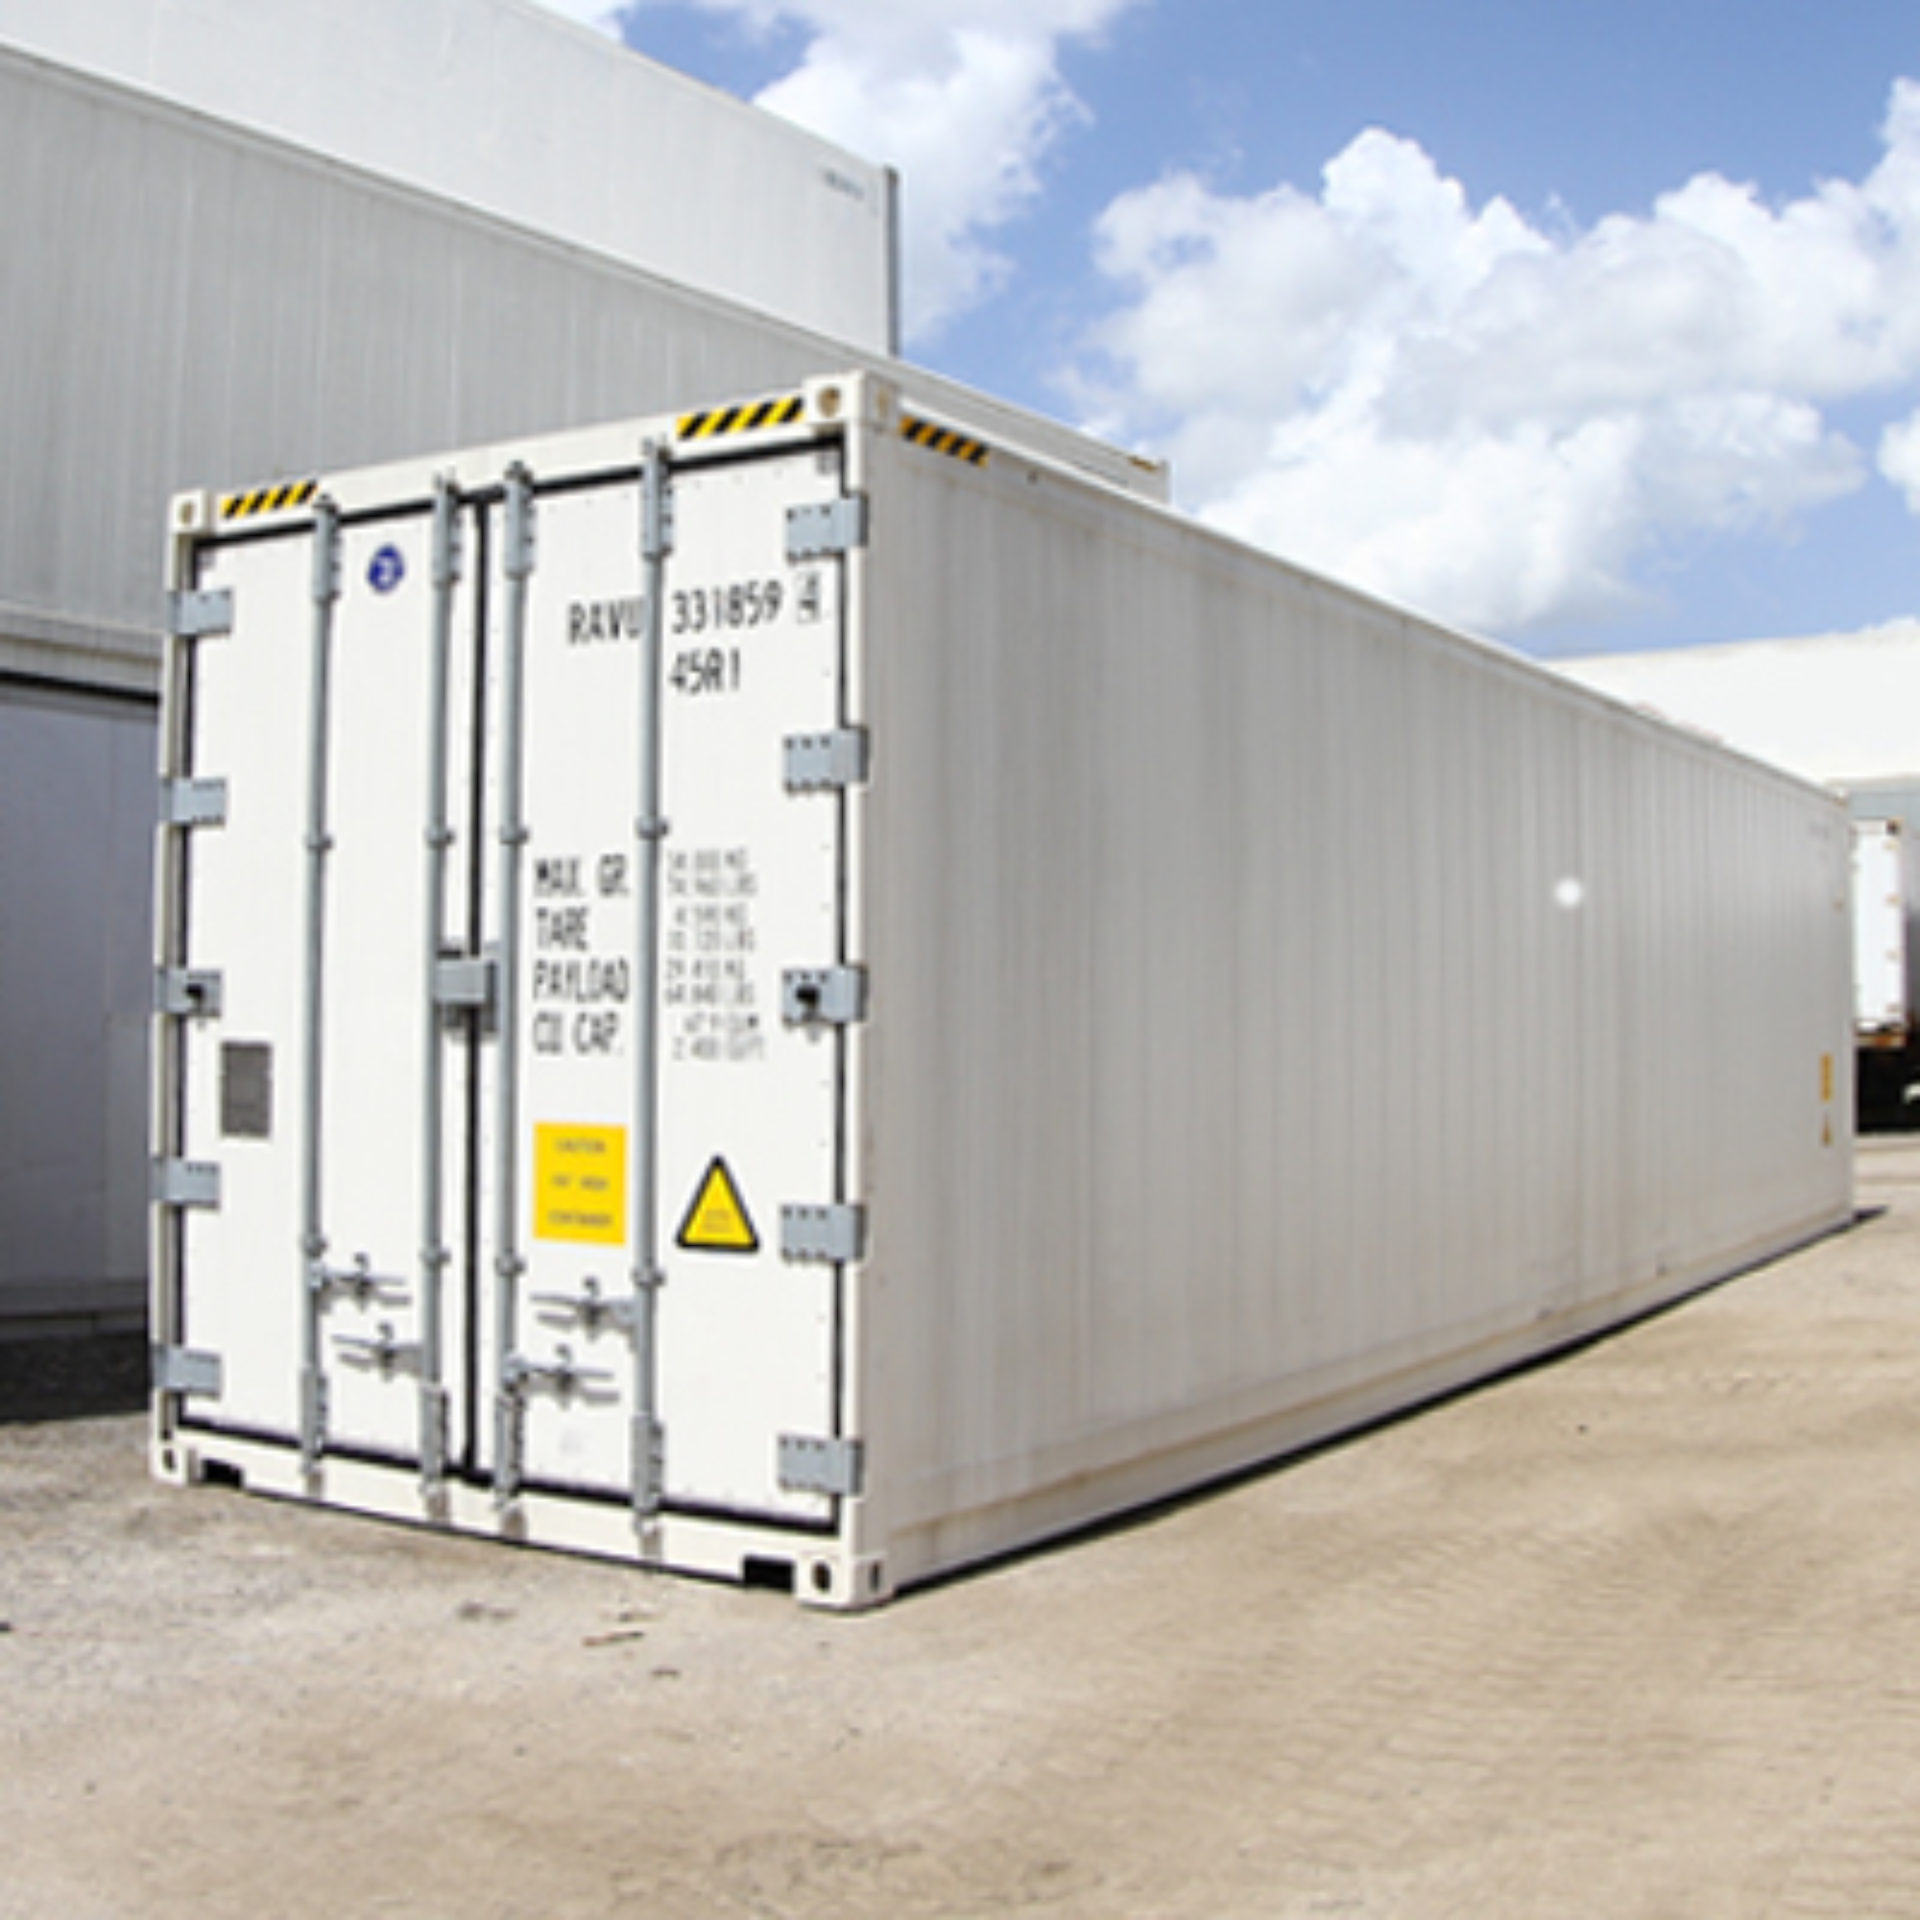 40' Reefer Cooler Container  40 Foot Refrigerated Containers